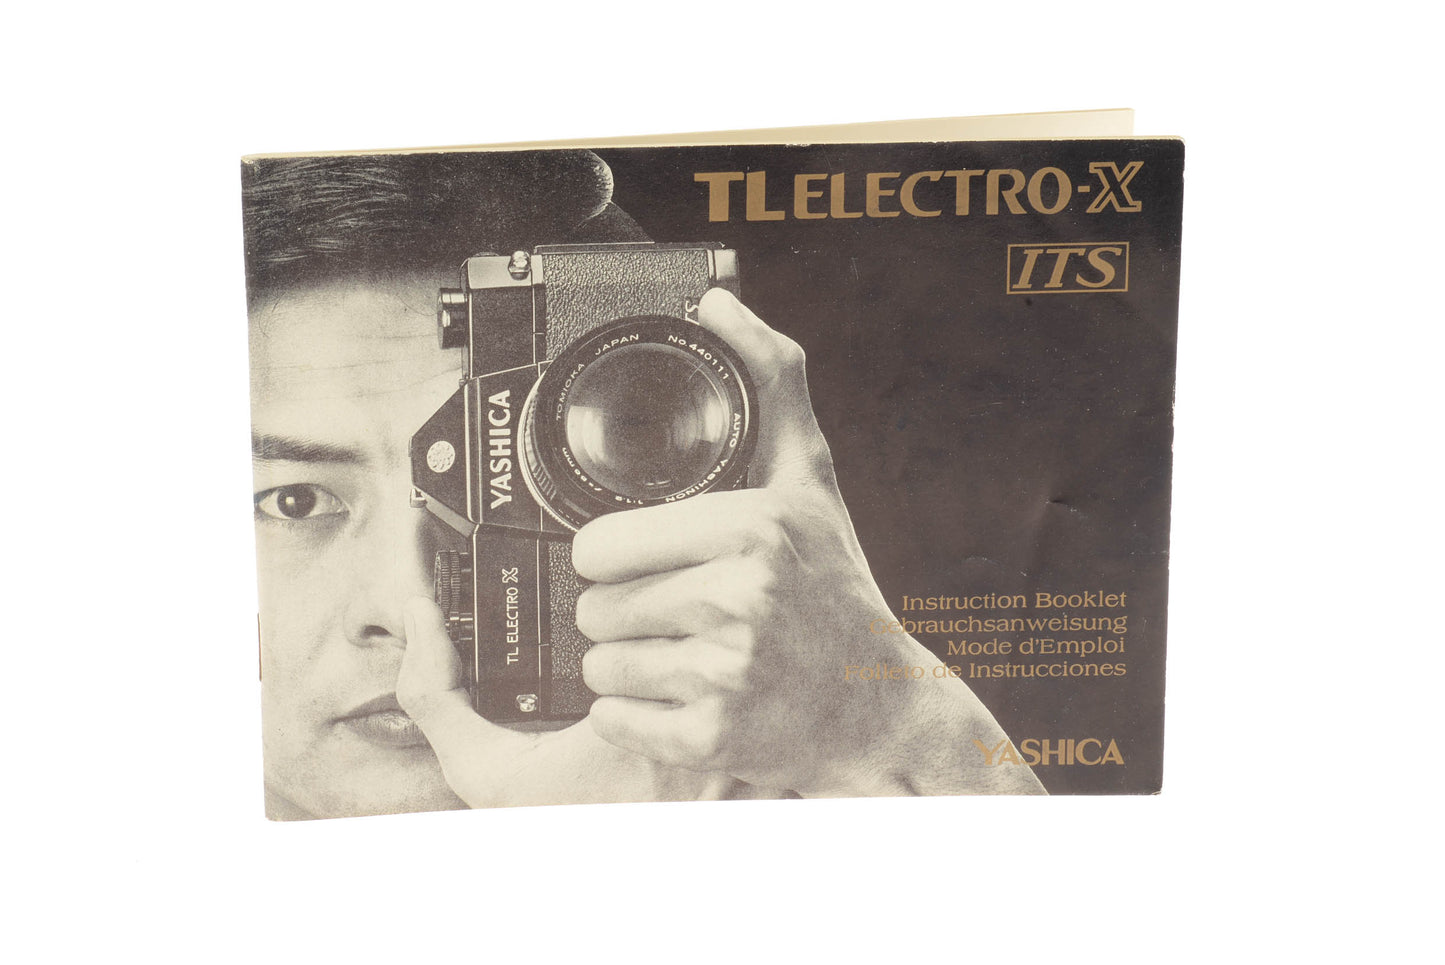 Yashica TL Electro-X ITS Instruction Booklet